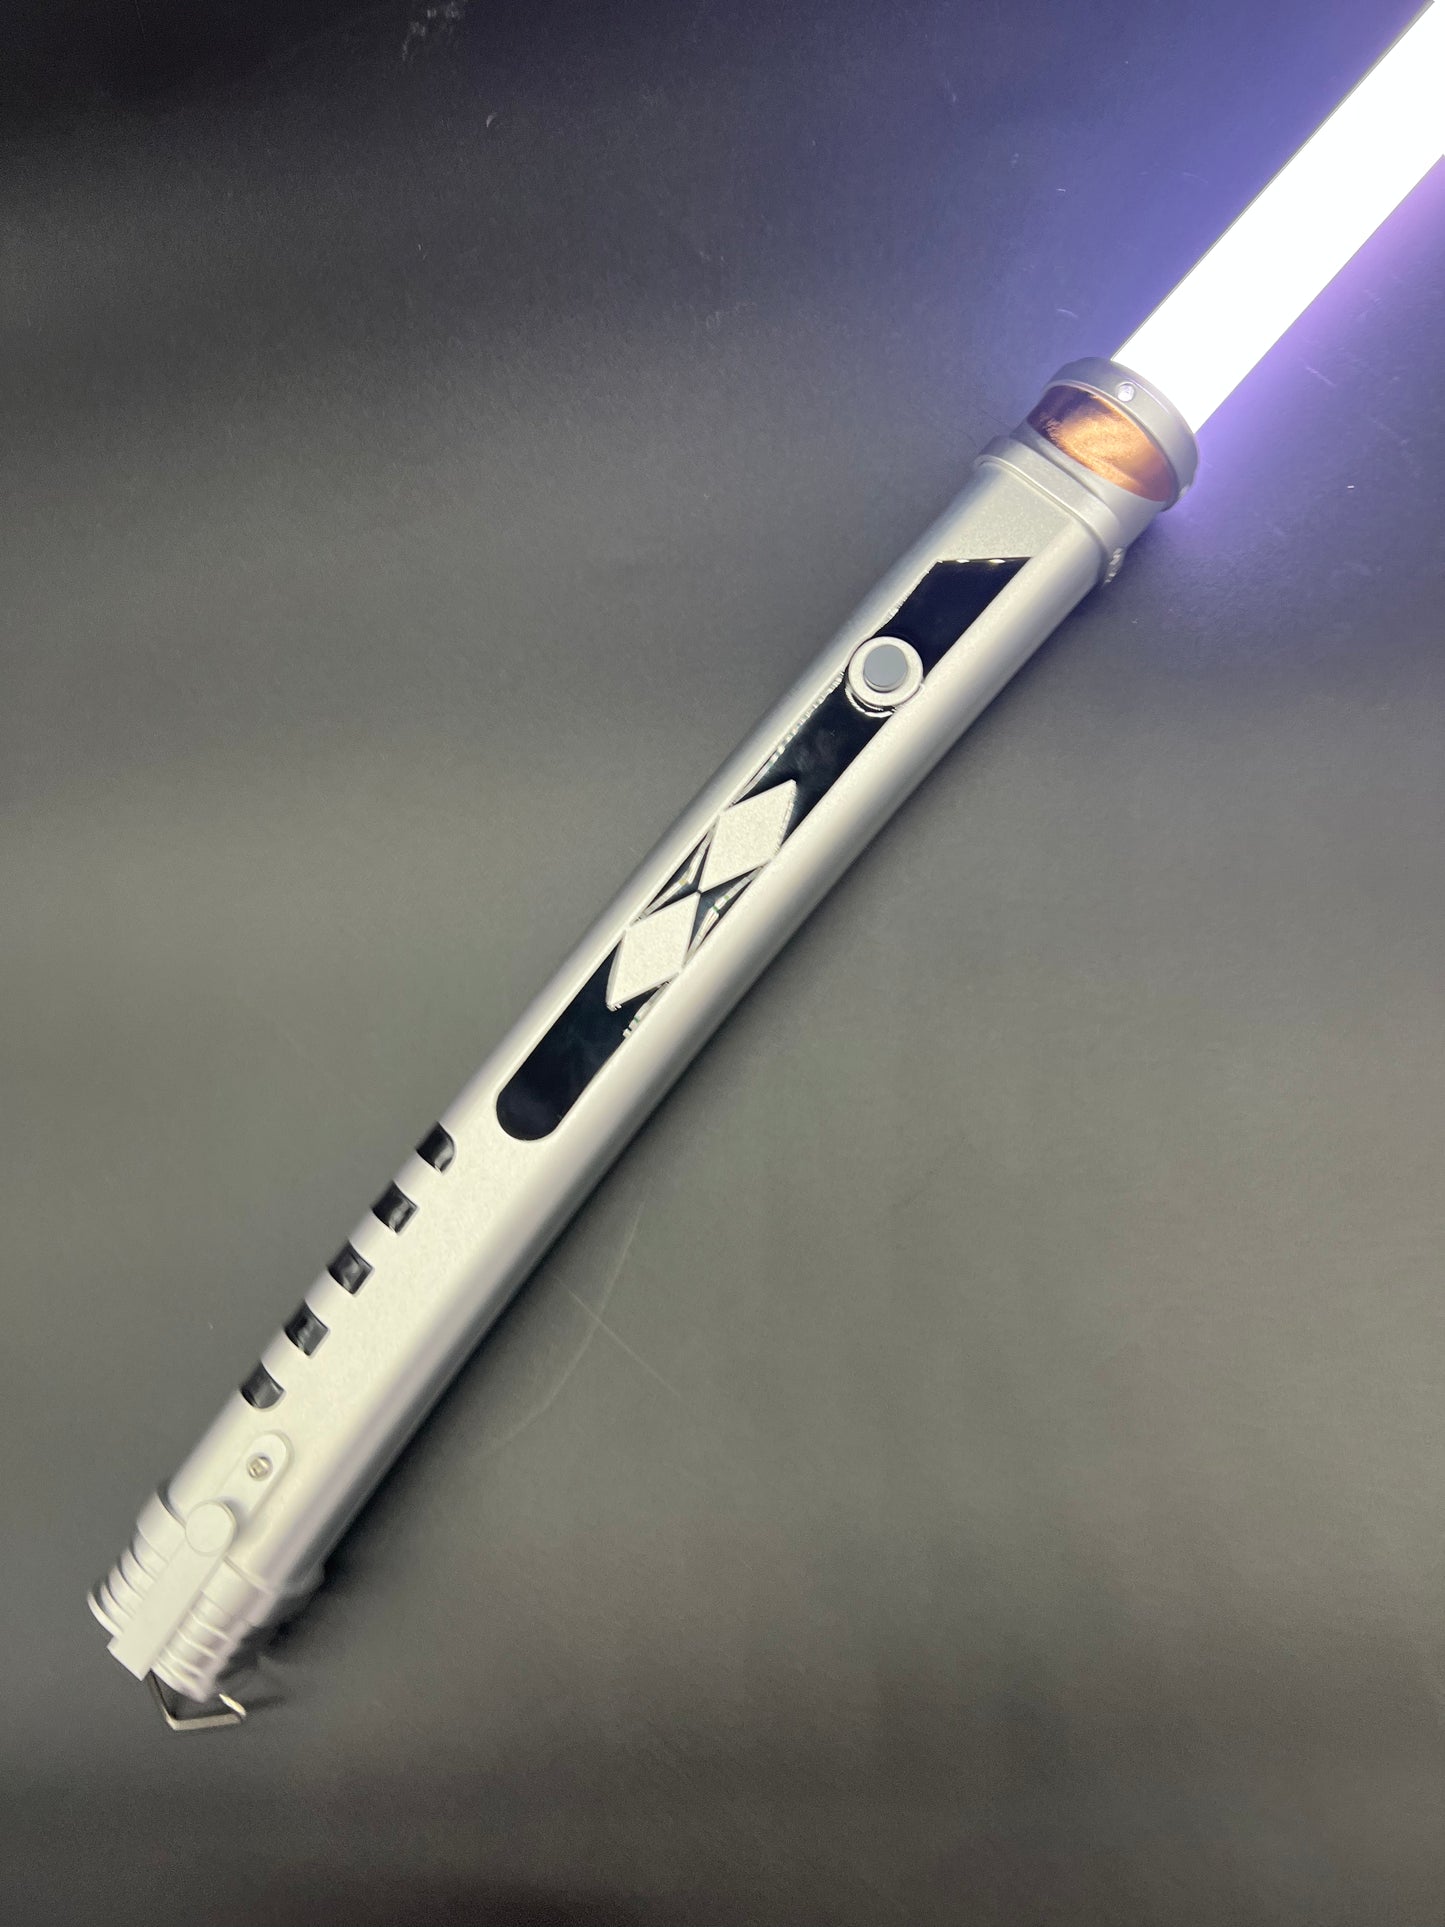 THE FULCRUM TANO CHALLENGER LIGHTSABER